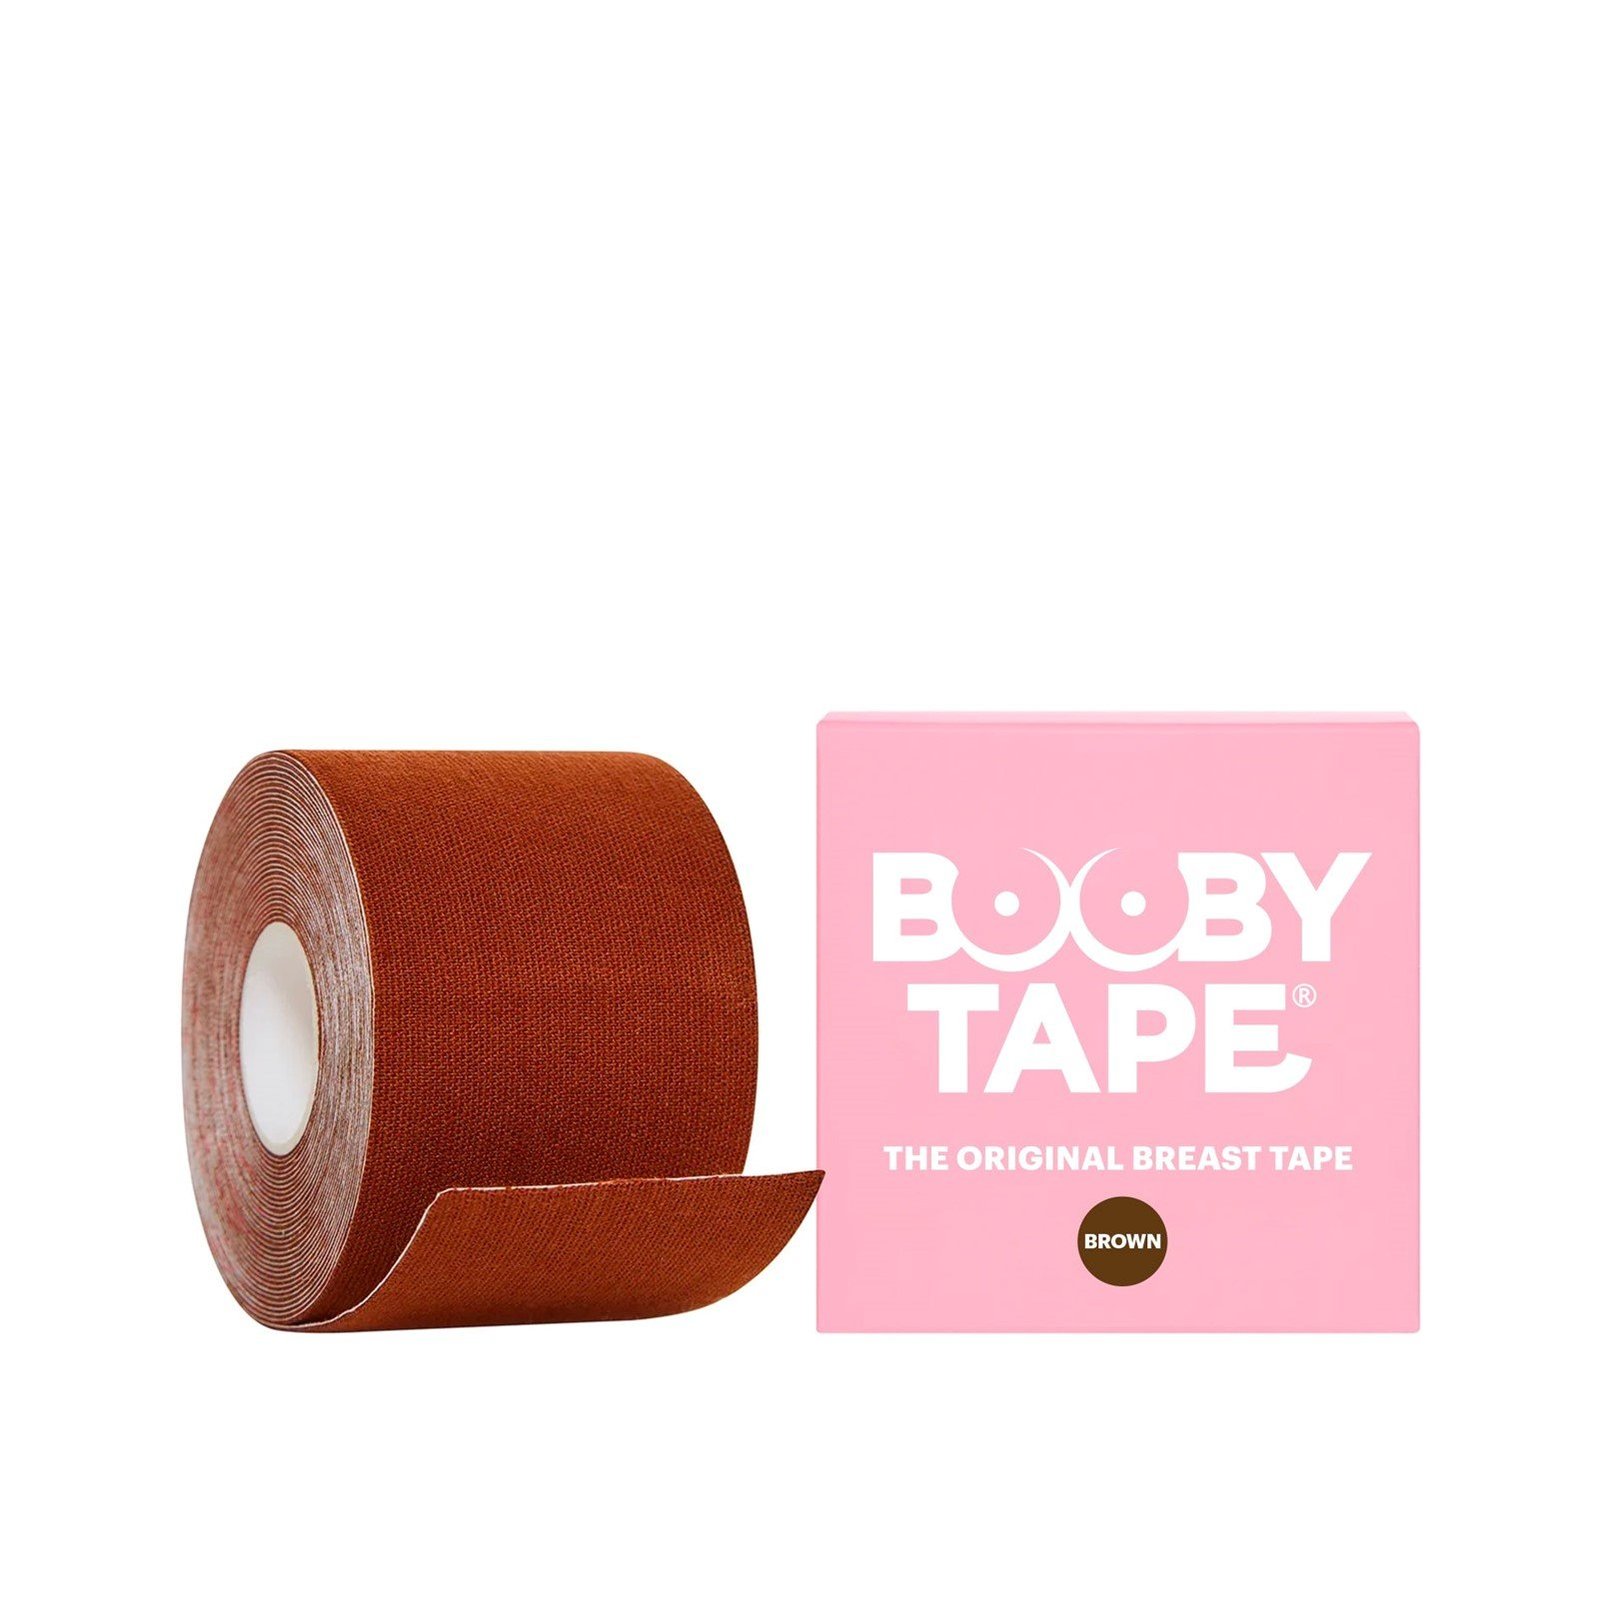 Buy Booby Tape The Original Breast Tape Brown 5m · China